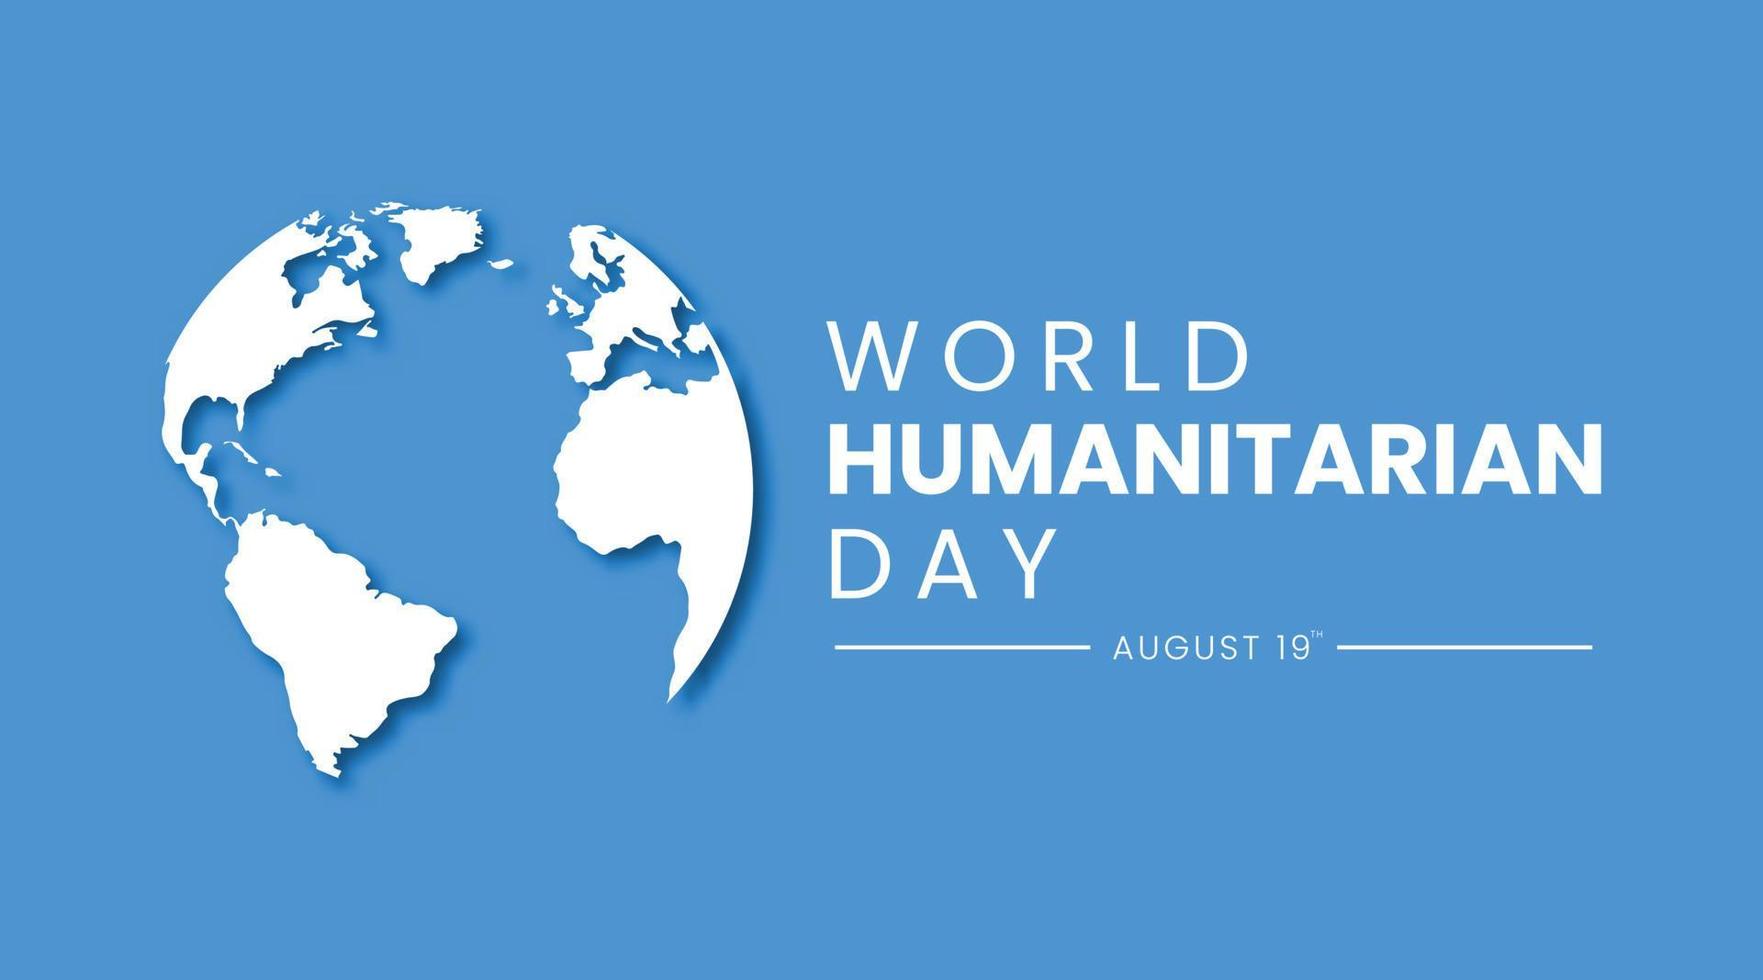 Simple minimalist World Humanitarian Day poster banner design with 3d globe illustration in blue background color vector